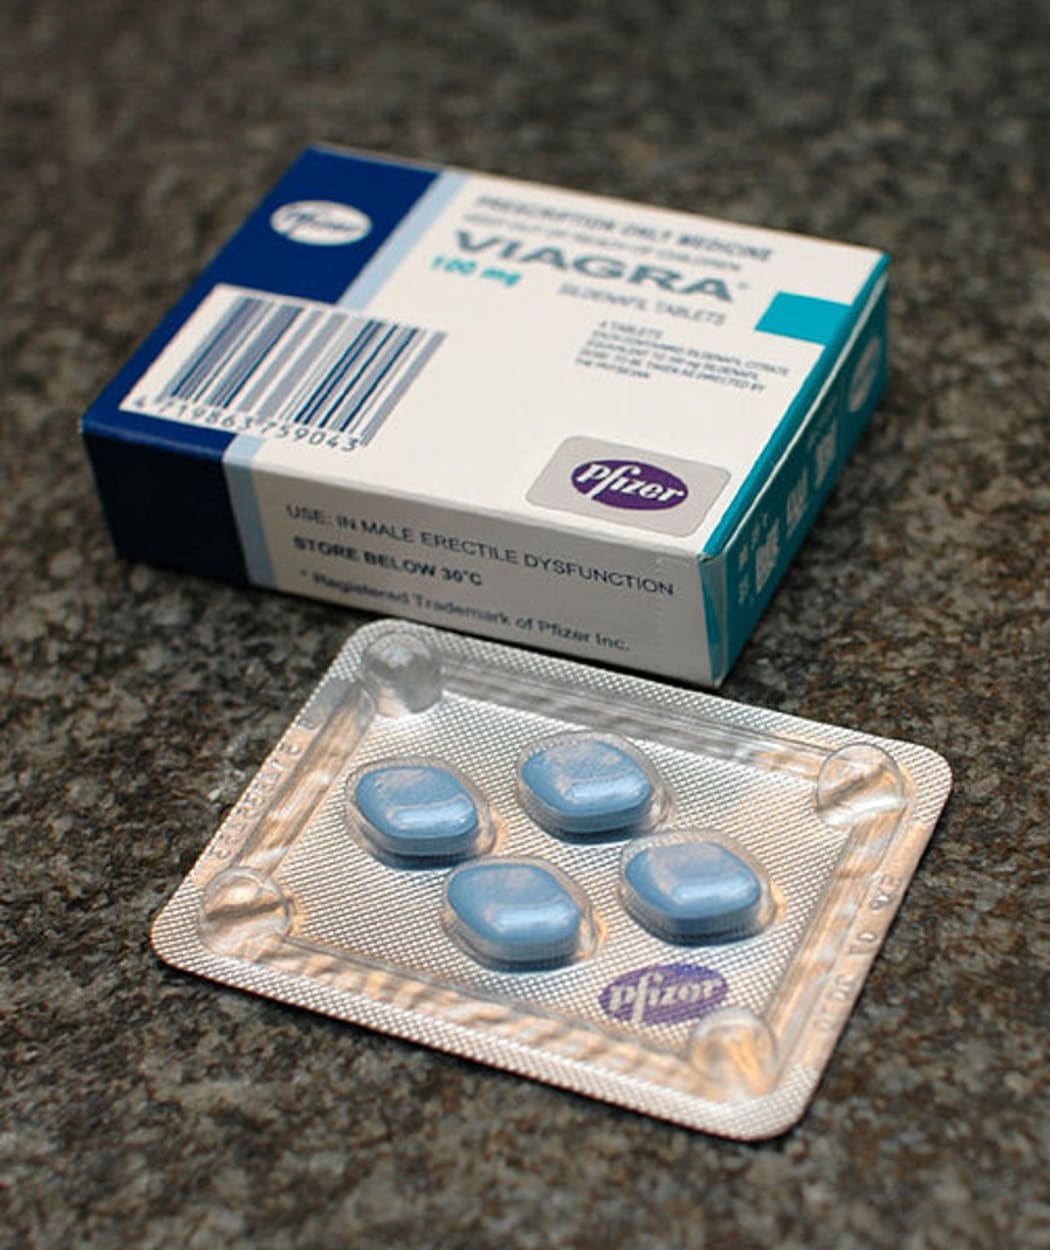 A pack of 4 Viagra tablets